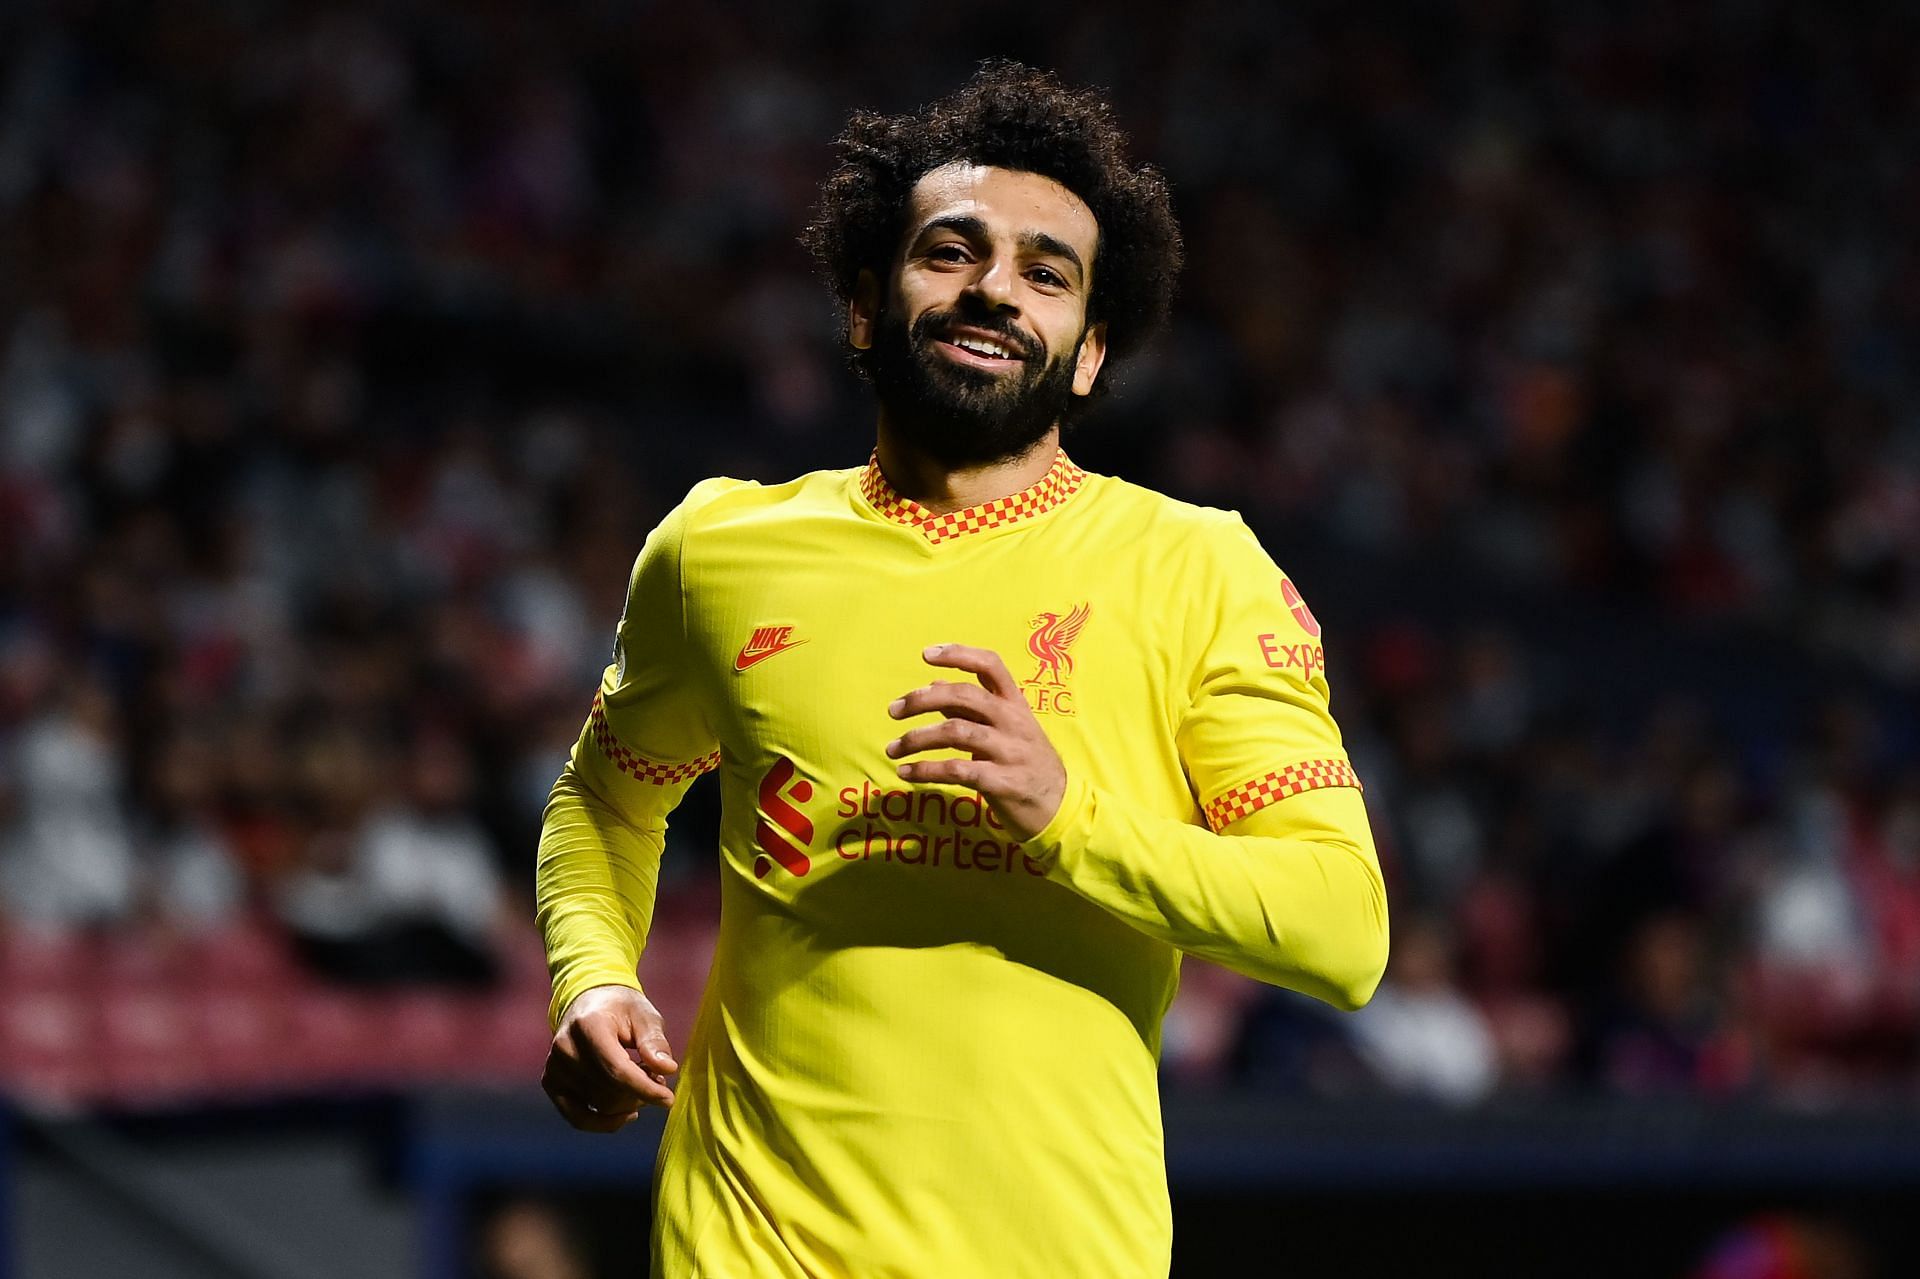 Mohamed Salah has scored goals galore in the Premier League.